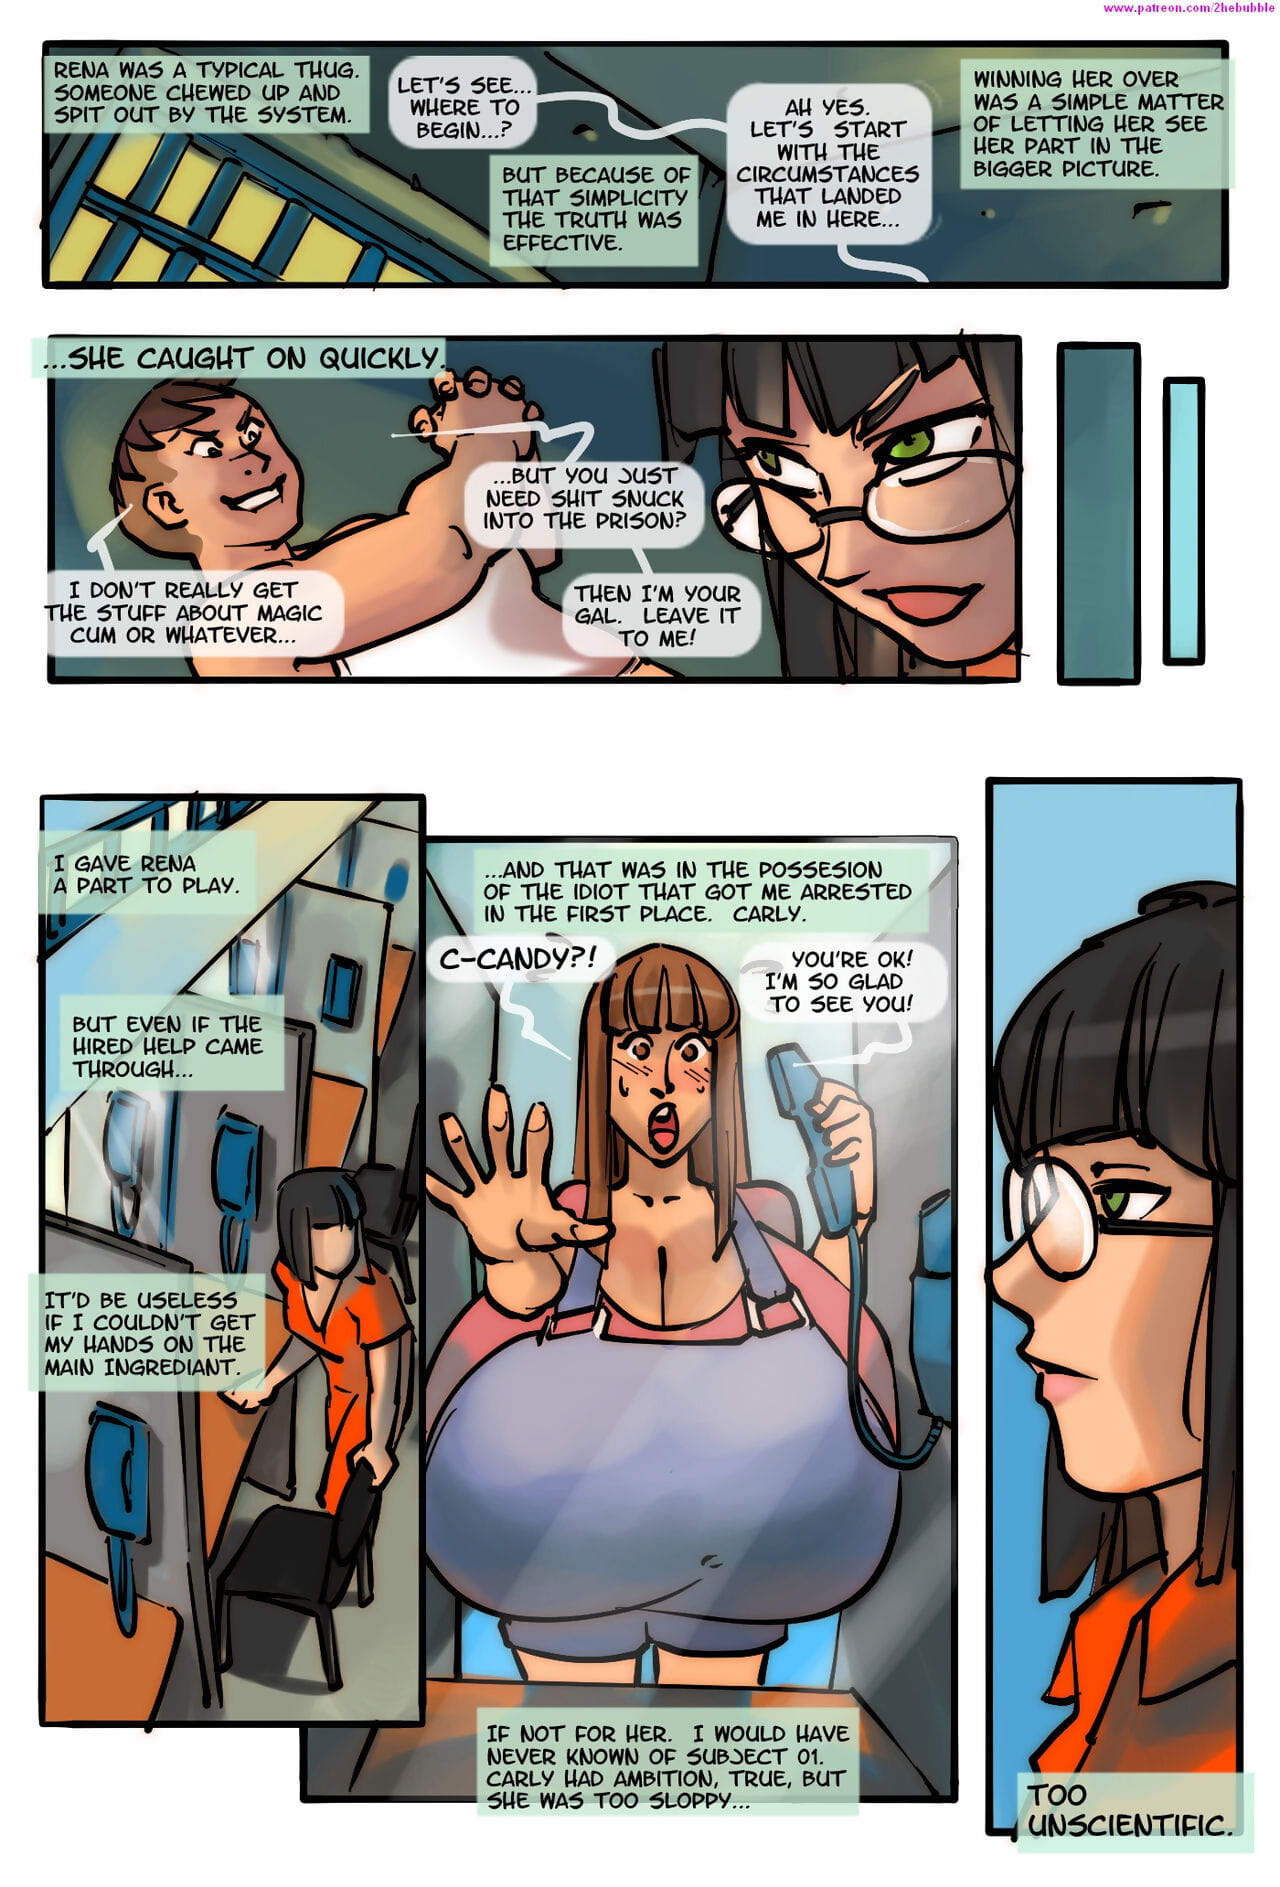 Sidneymt- Thought Bubble #1 page 1